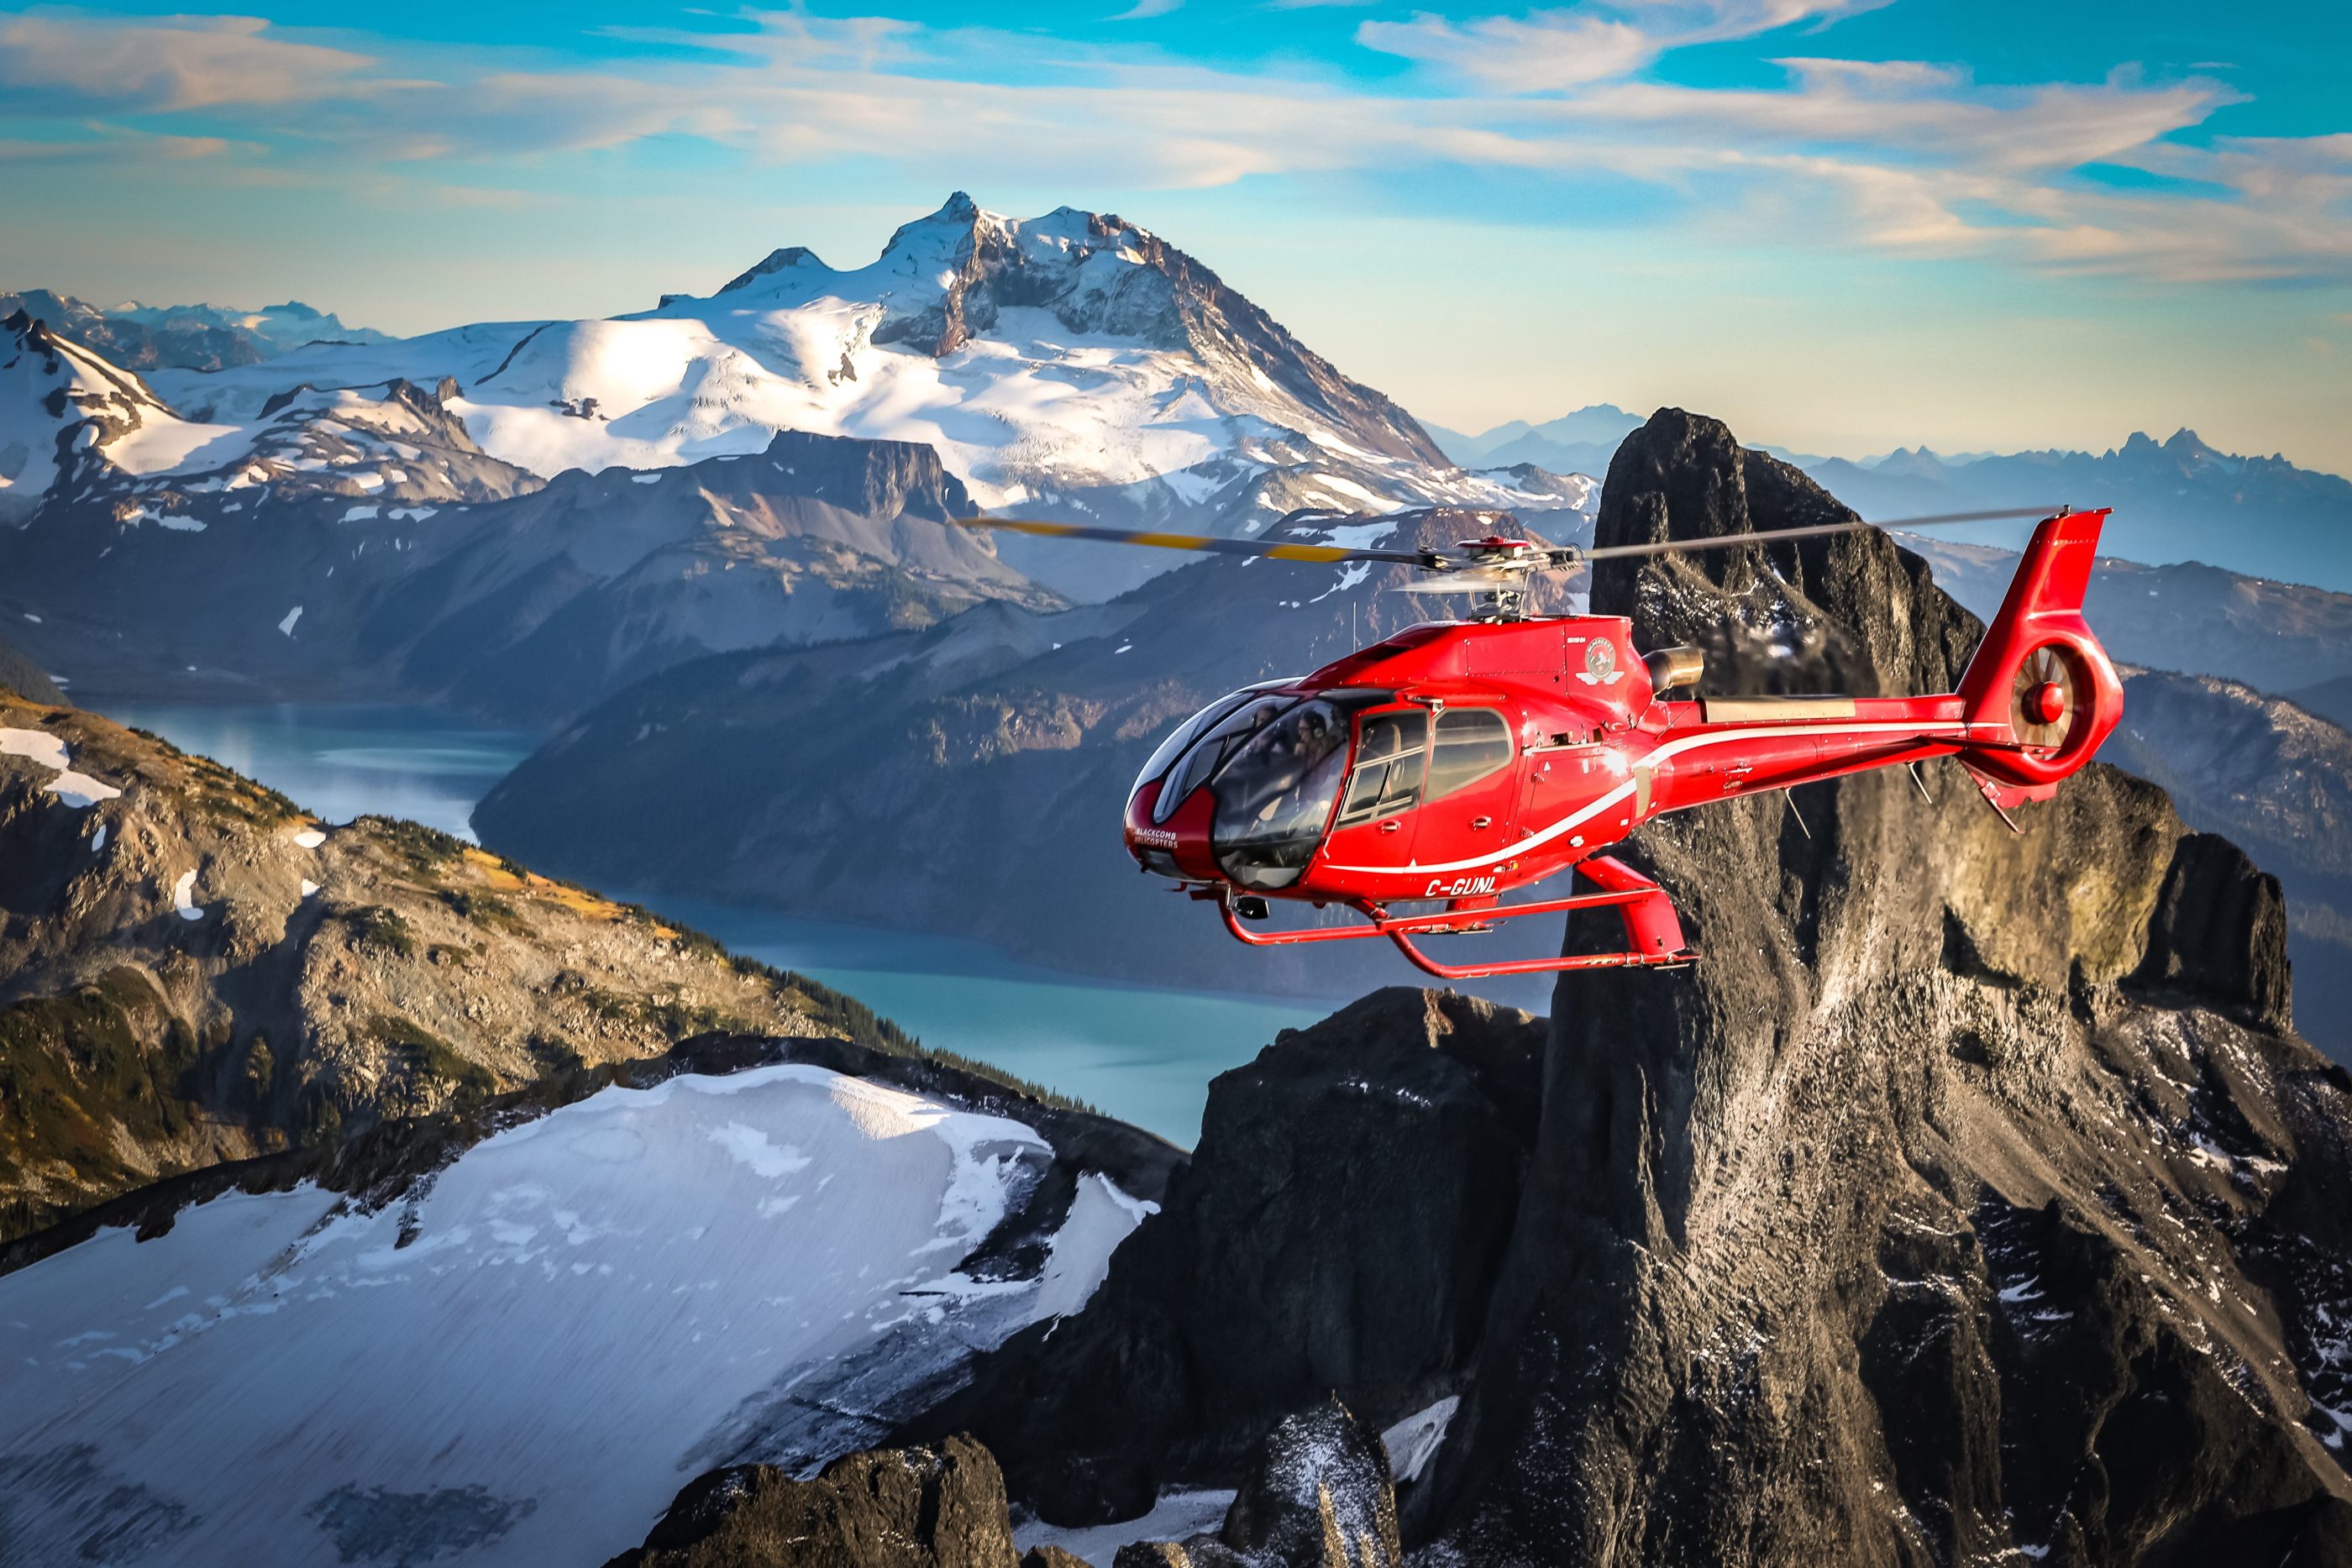 Blackcomb Helicopters has a fleet of 22 aircraft across six bases in British Columbia. Blackcomb Helicopters Press Release